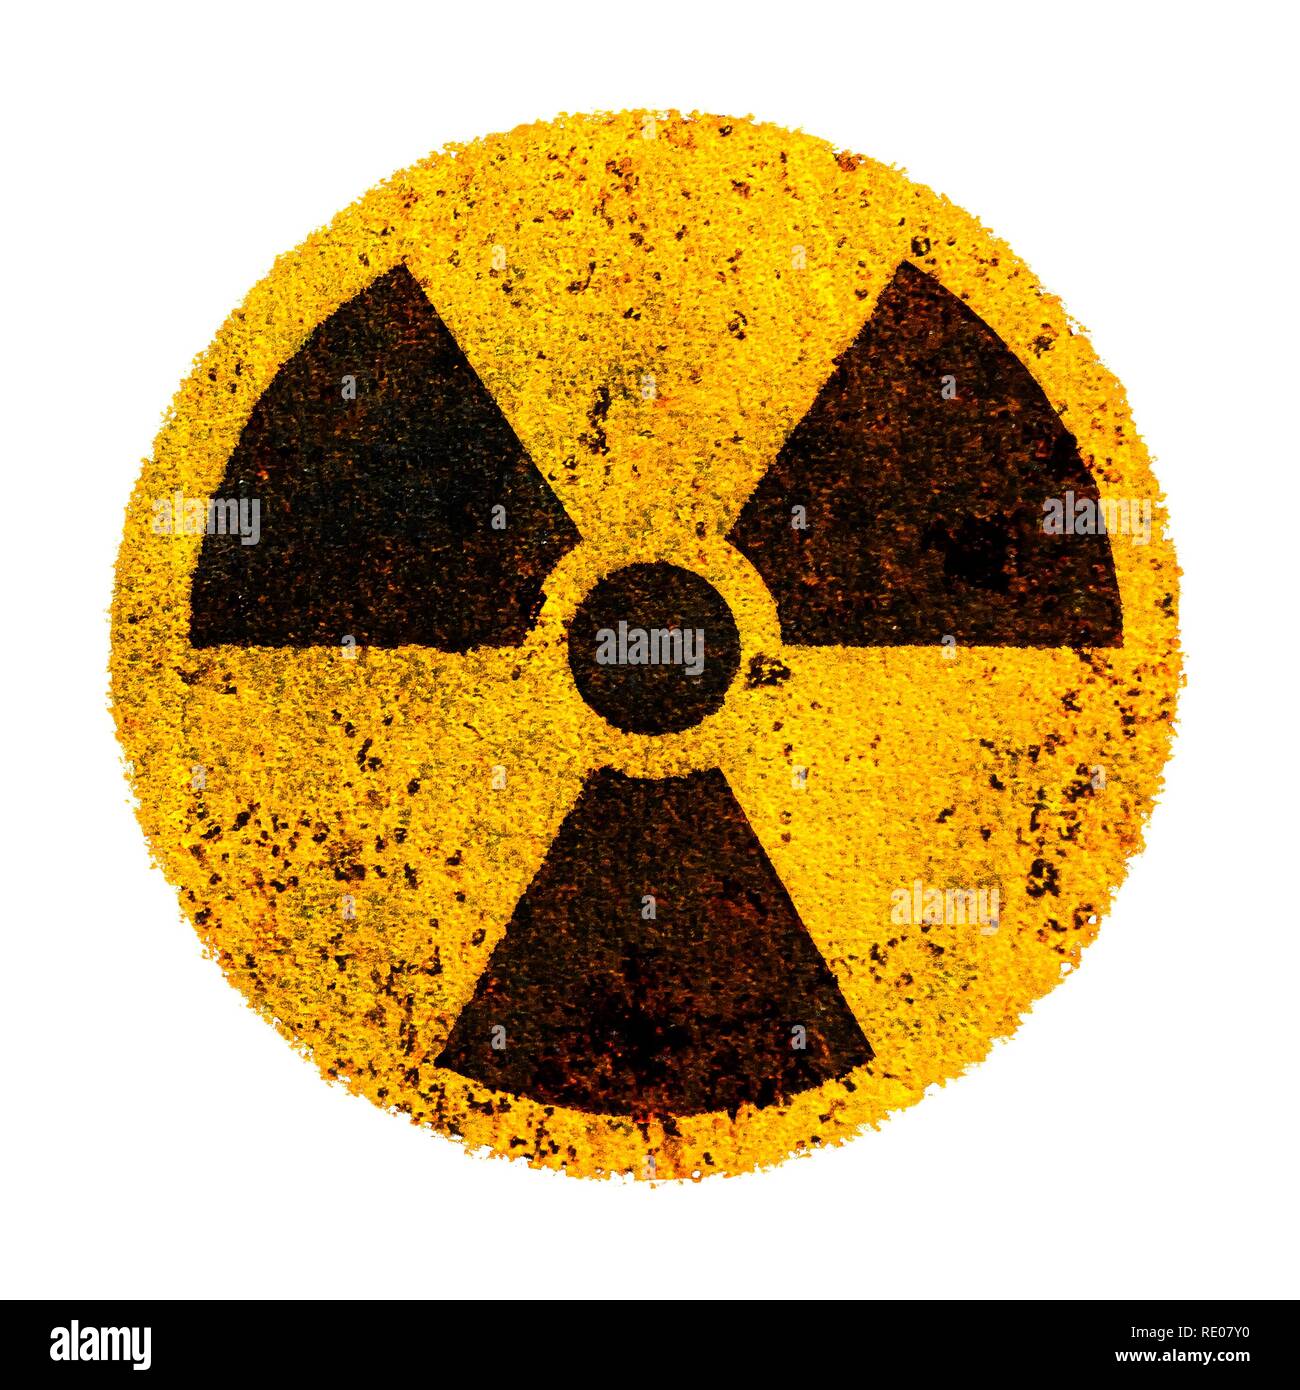 Round yellow and black radioactive (ionizing radiation) nuclear alert danger symbol on rusty metal grungy texture and isolated on white square format  Stock Photo